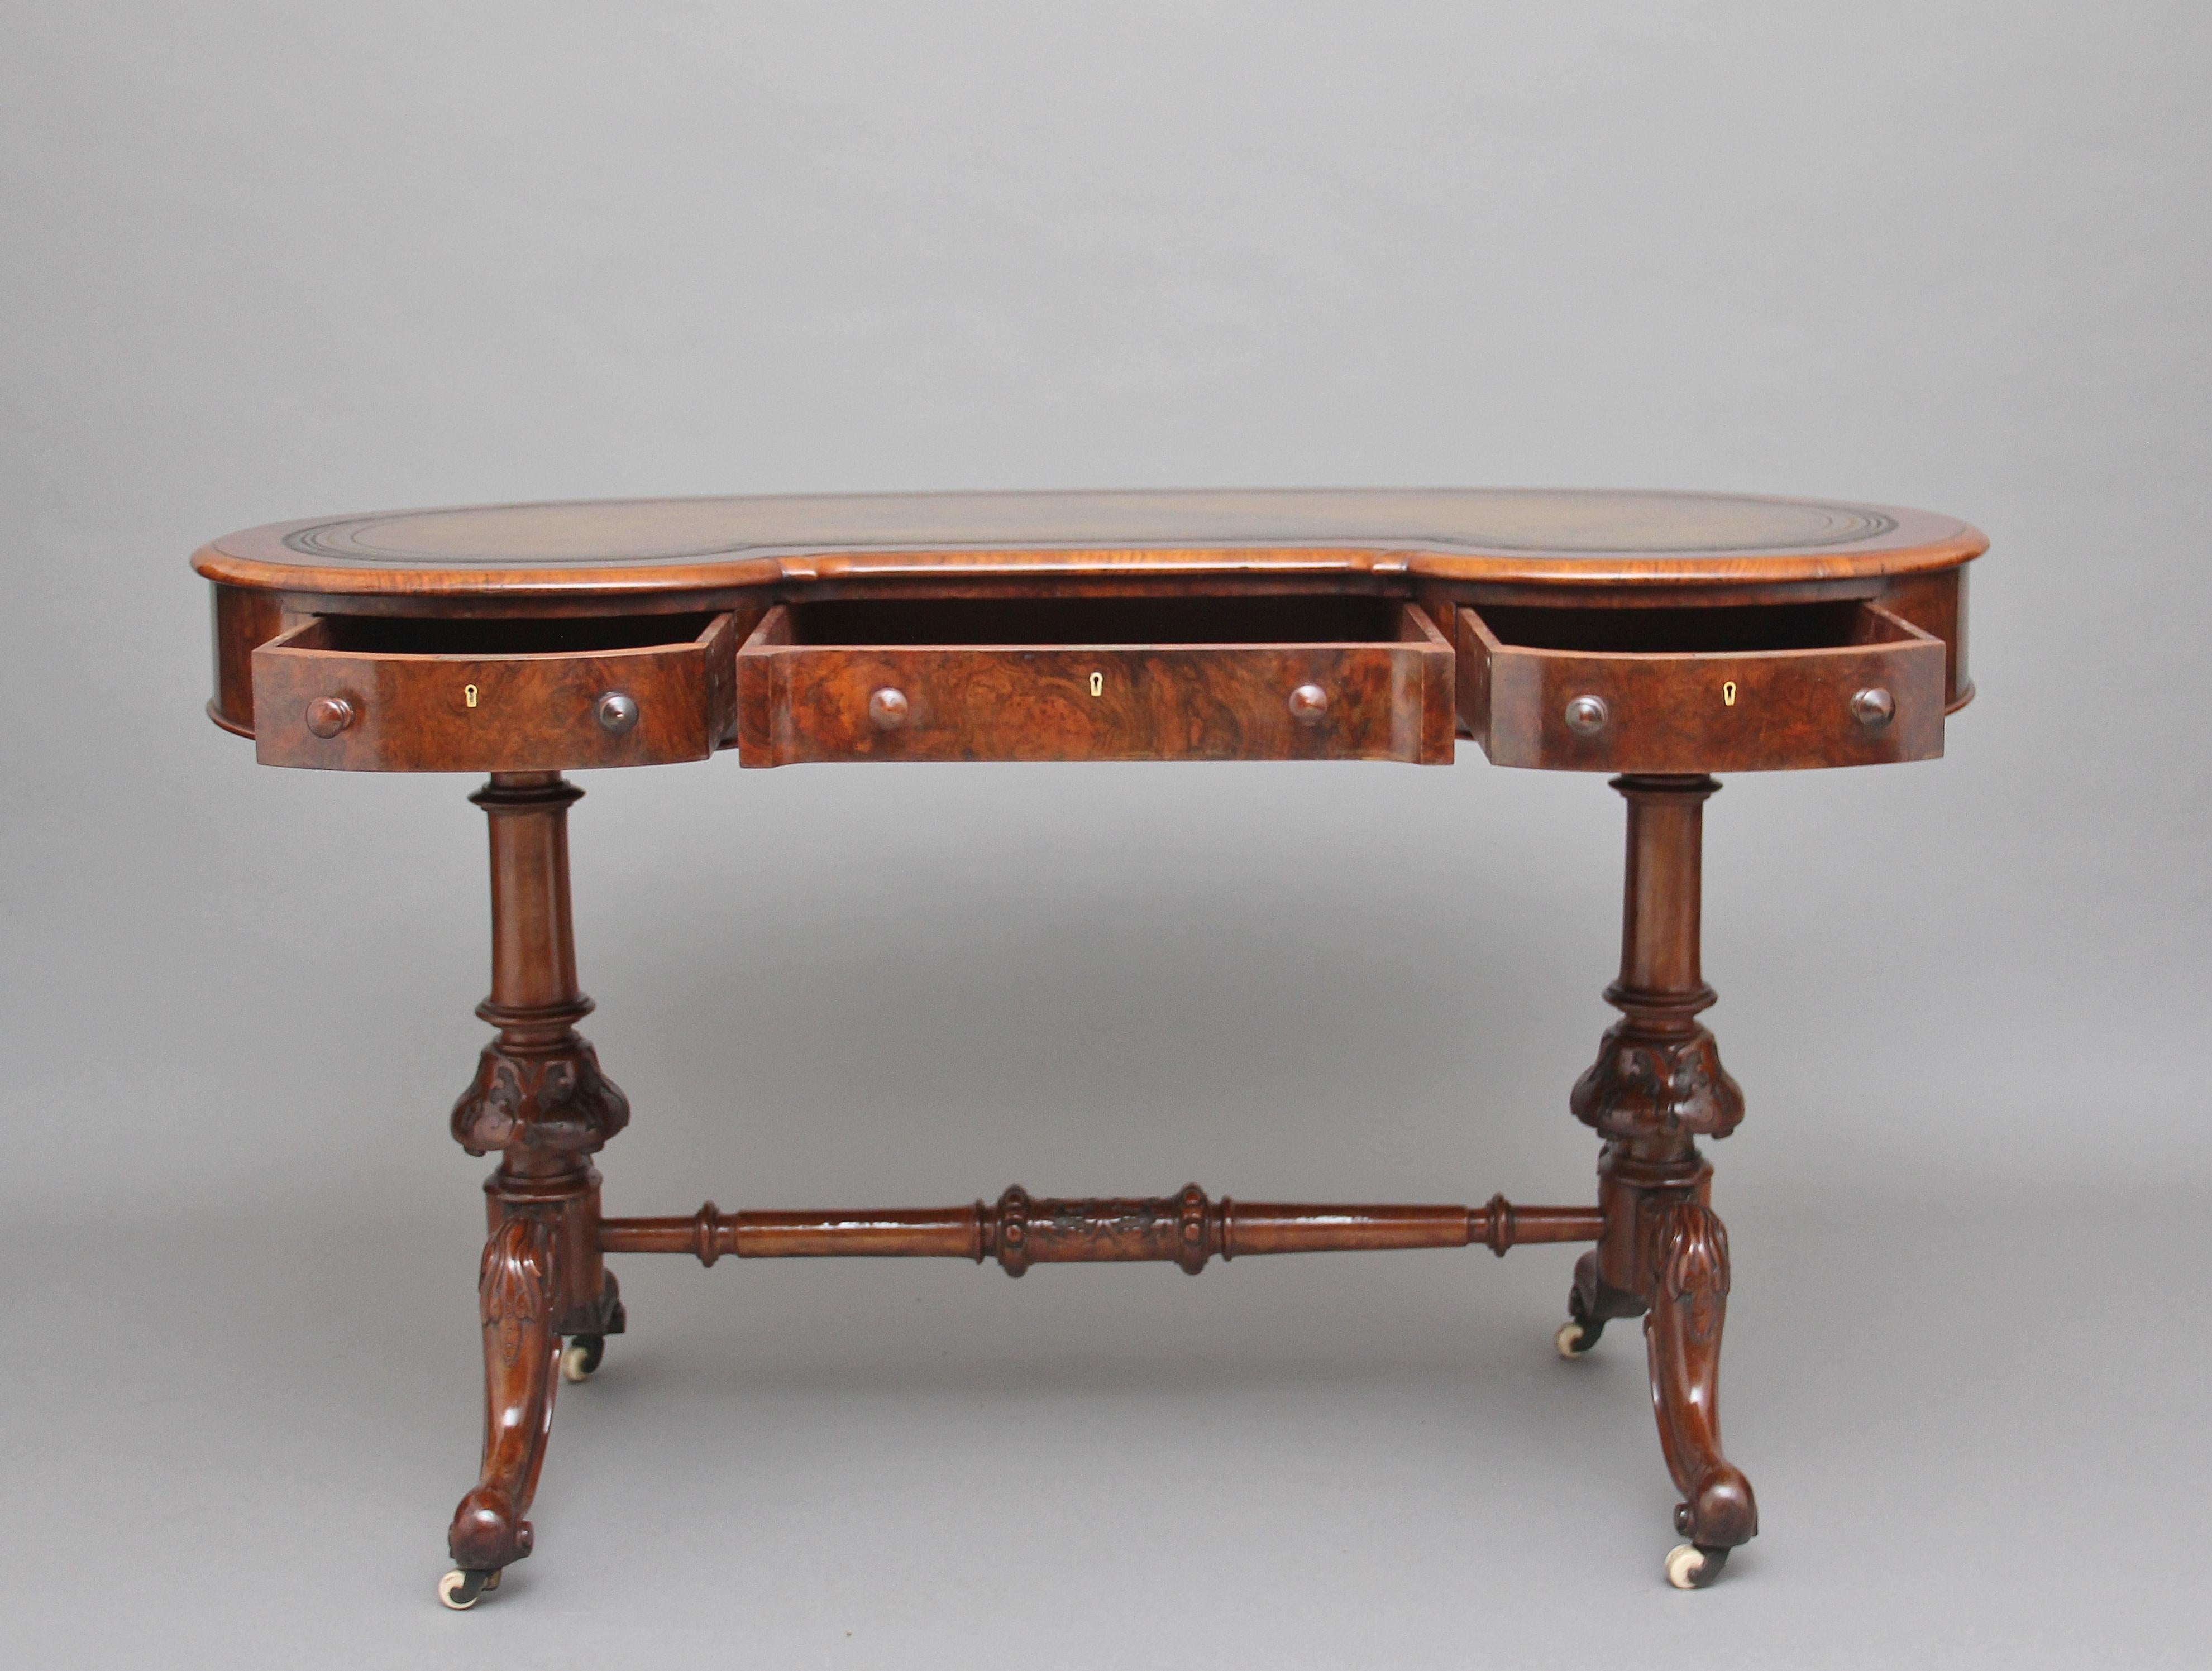 A good quality 19th century burr walnut writing table, the molded edge kidney shaped top, having a tobacco colored leather writing surface decorated with blind and gold tooling, the frieze below having three mahogany lined drawers with original